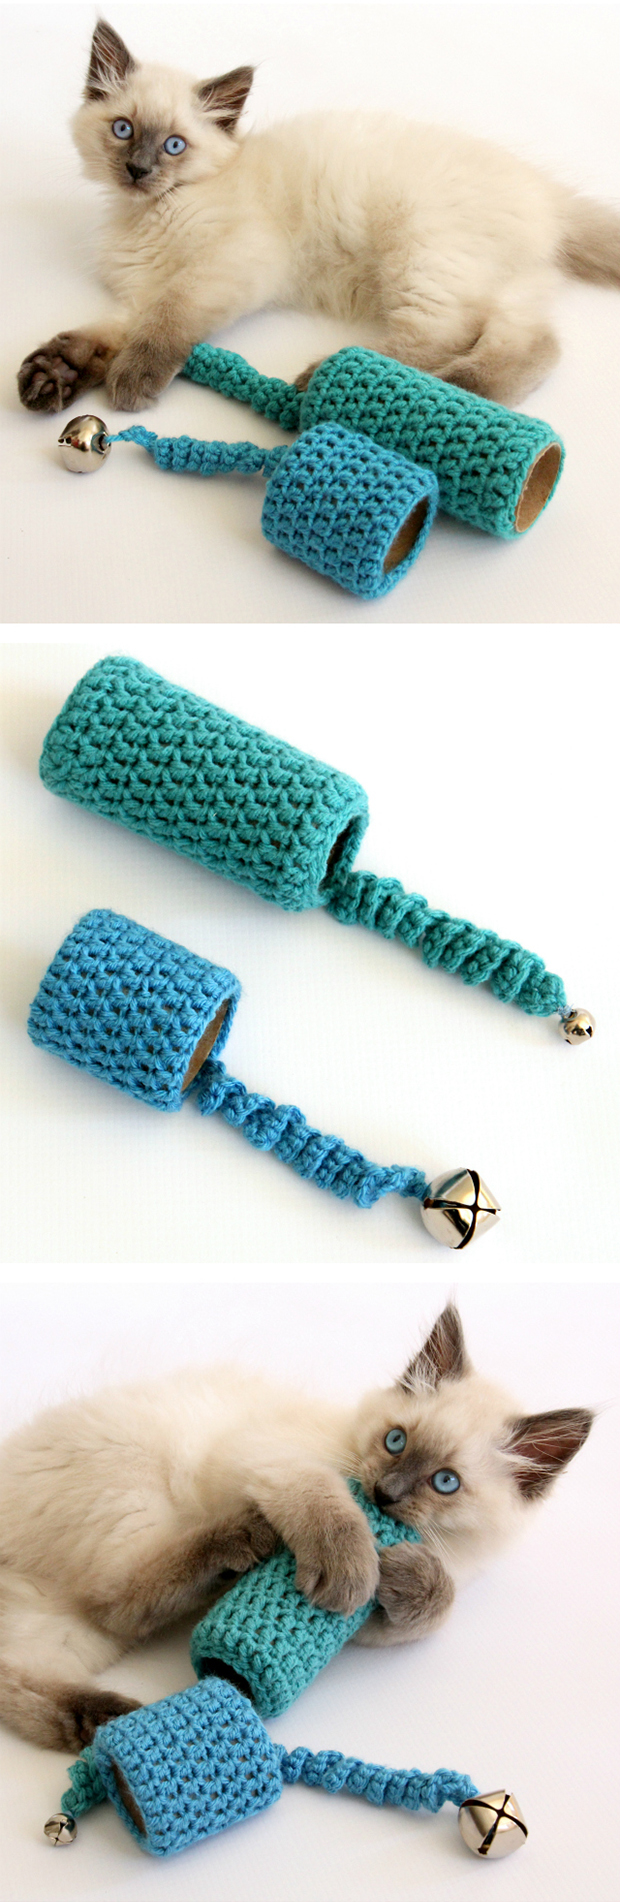 Toilet Paper Roll Crocheted Cat Toy